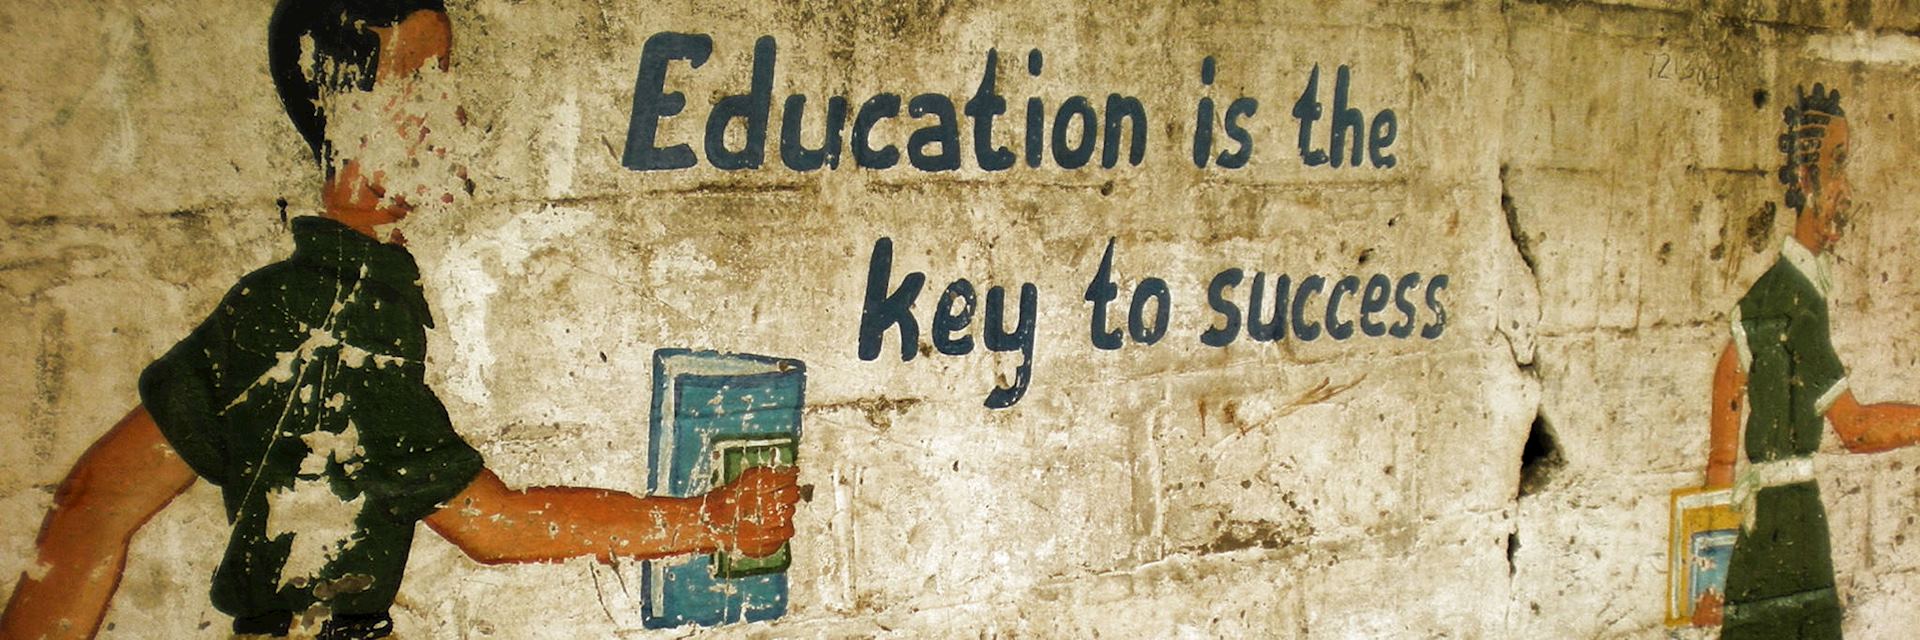 A mural in Africa highlighting the importance of education